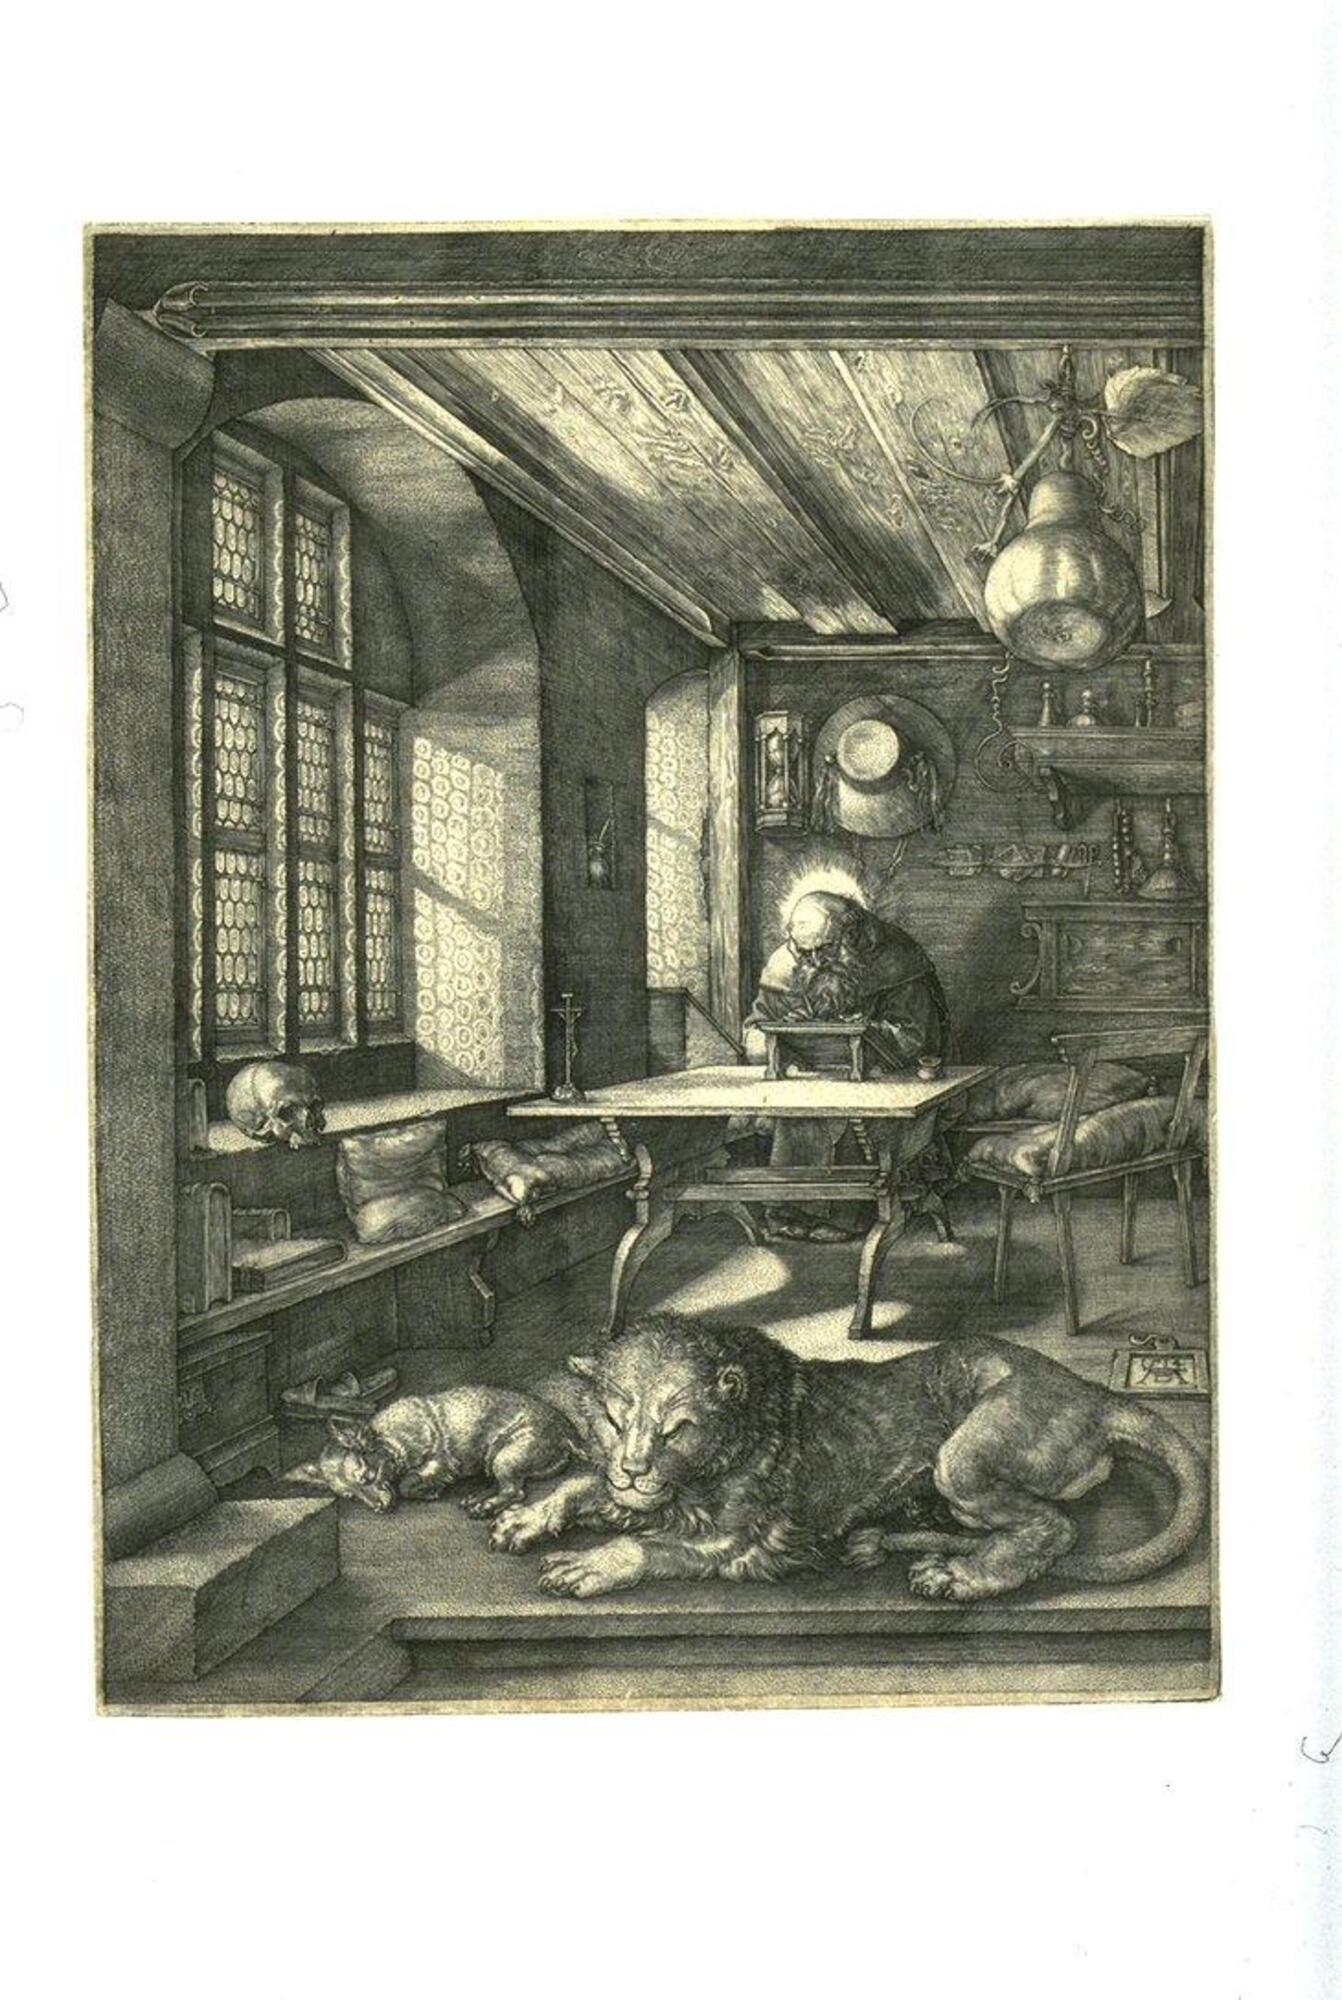 This engraving depicts a comfortable domestic interior. An old bearded man sits poring over a book at table in the back of the room. A lion and dog rest on the floor in the foreground. Various other objects appear around the room, including a skull, books, slippers, a crucifix, and a pair of scissors.